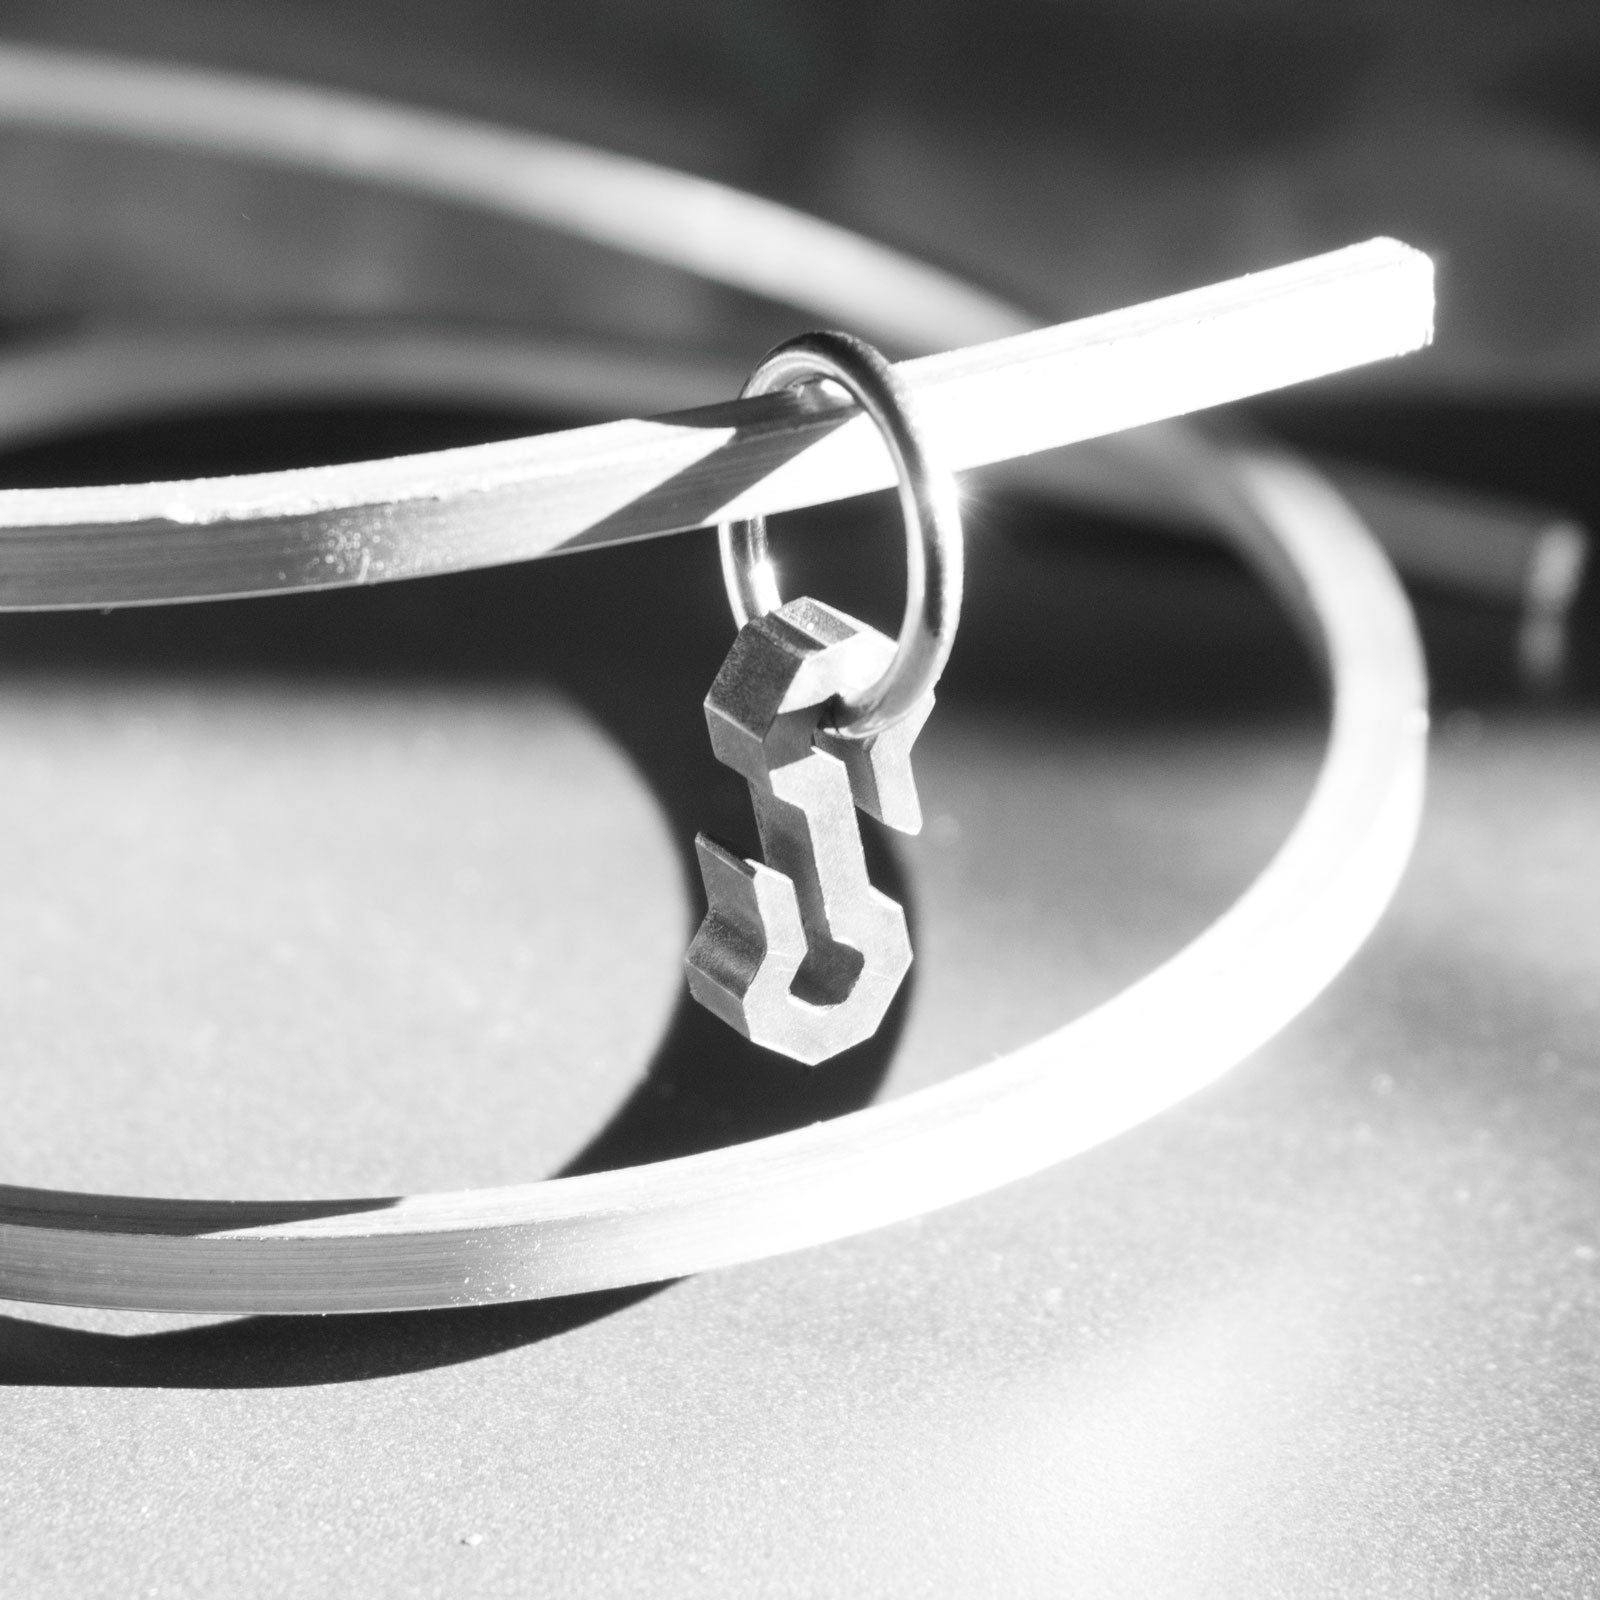 The Type S is a minimalist, timeless shape with angular lines. It is handmade from grade 5 titanium, meaning that it is super light to wear and is biocompatible.